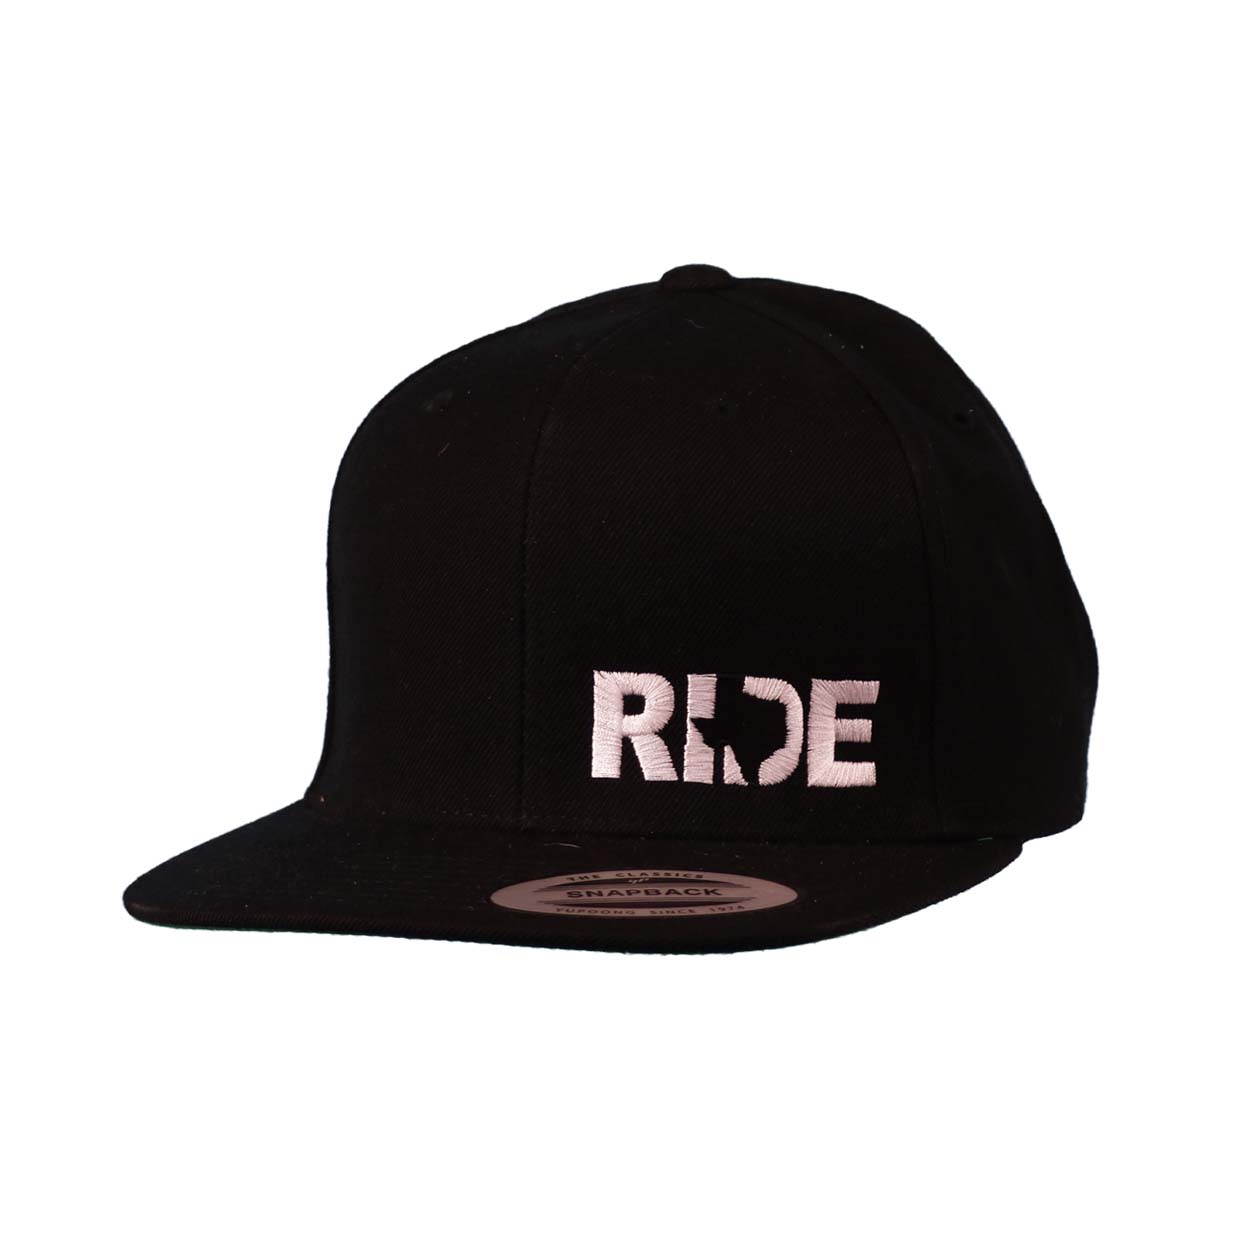 Ride Texas Night Out Embroidered  Snapback Flat Brim Hat Black